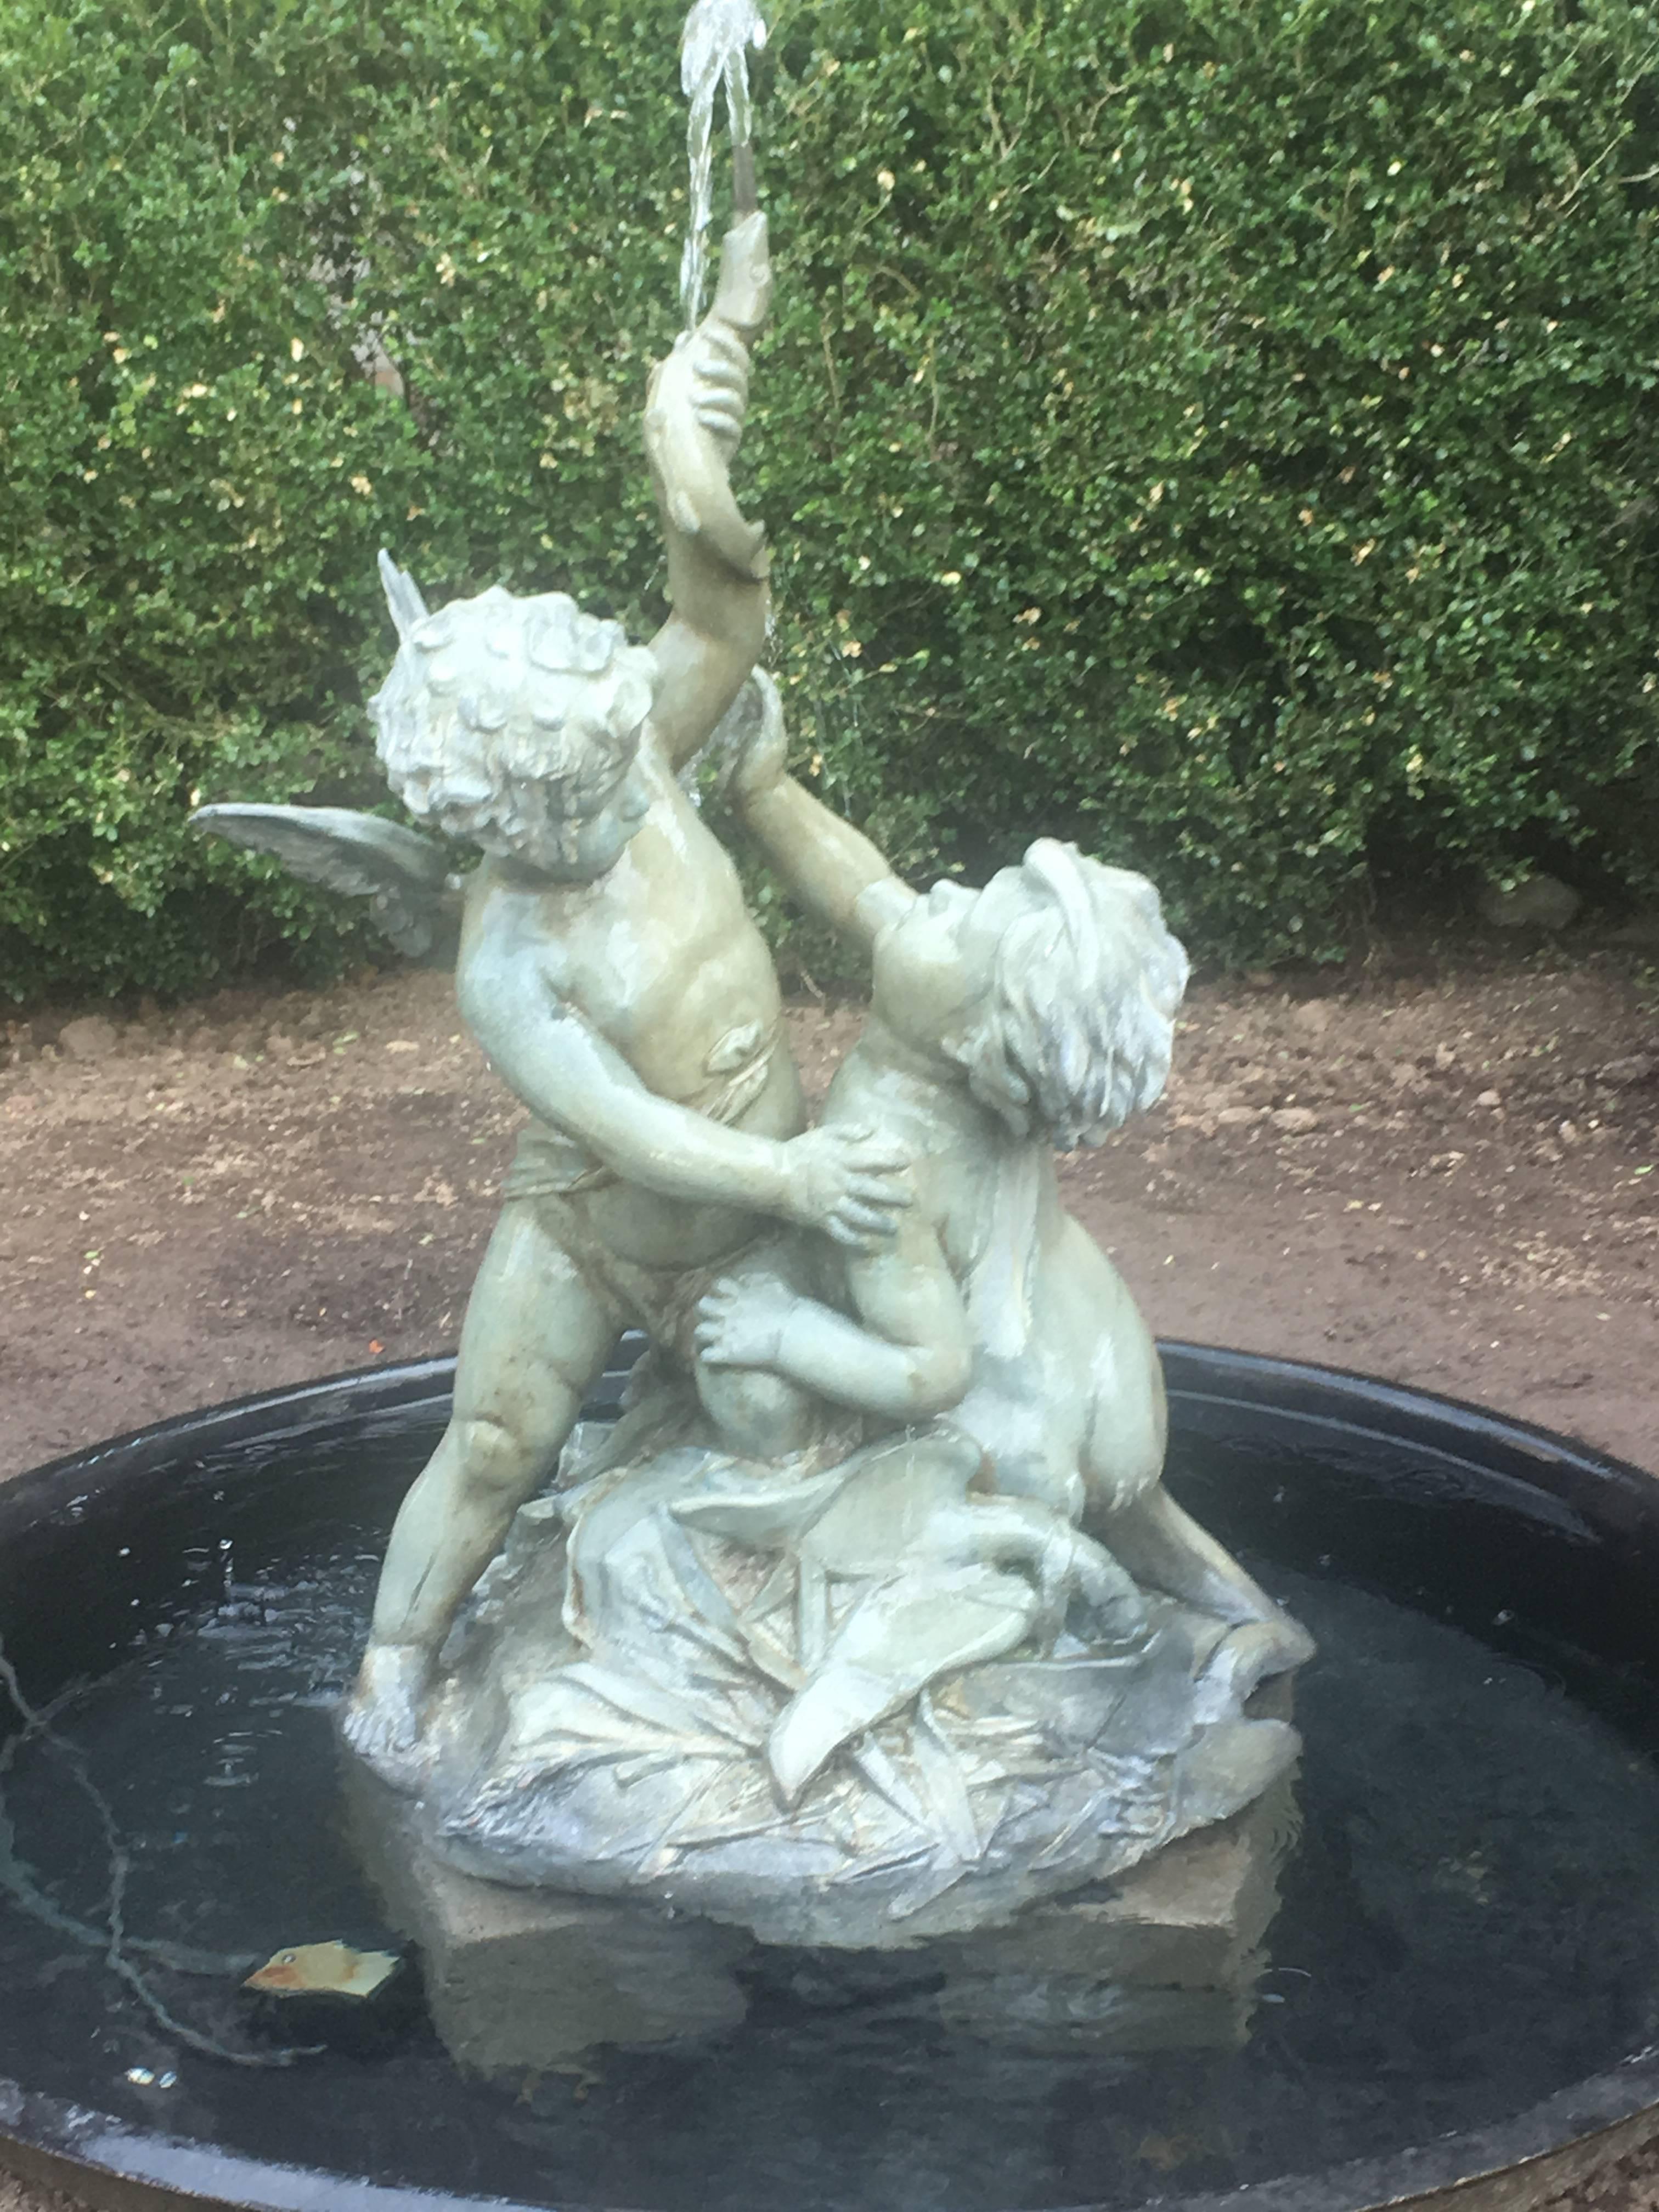 This magnificent 19th century zinc fountain was purchased from the NY estate of Helen Finch Foulds, heir to the Finch Pruyn Lumber Company in Glens Falls, NY, and best known for her $4.5 Million bequest to the Metropolitan Museum of Art in the late